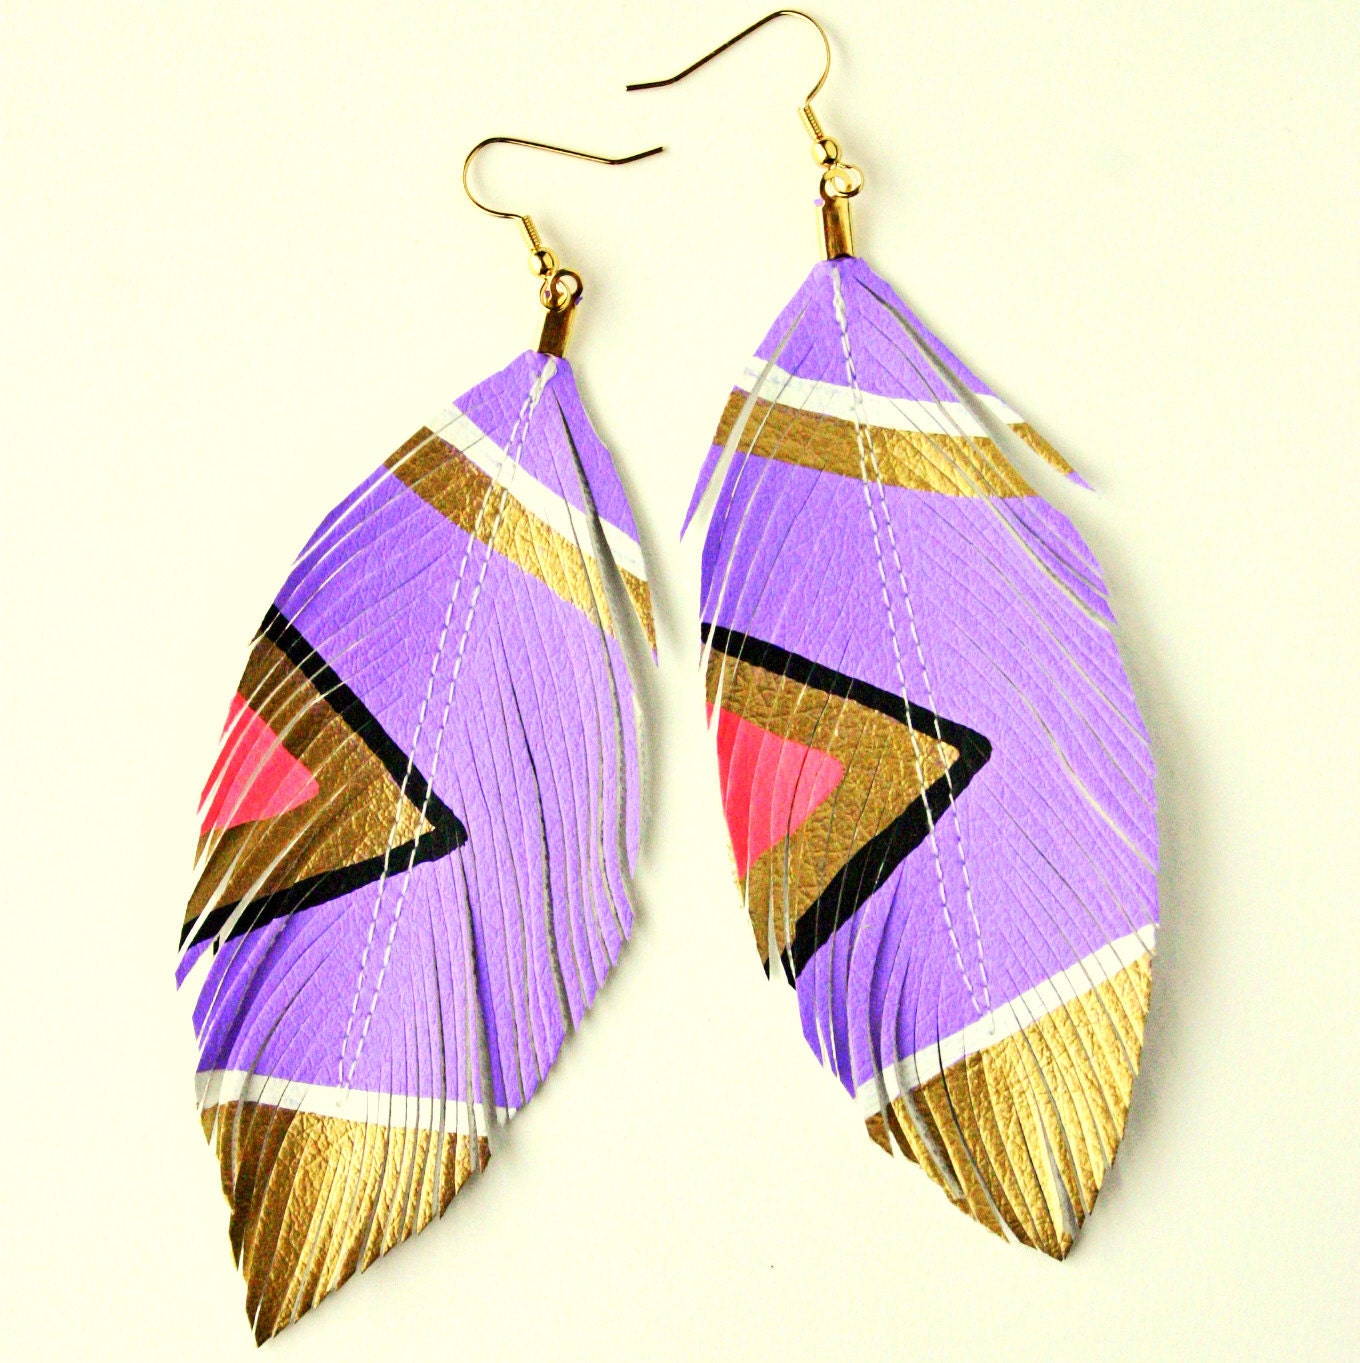 FEATURED in Mpls/St Paul Magazine - SALE - Neon Aztec  -  Lilac Purple - Hand Painted Faux Leather Feather Earrings